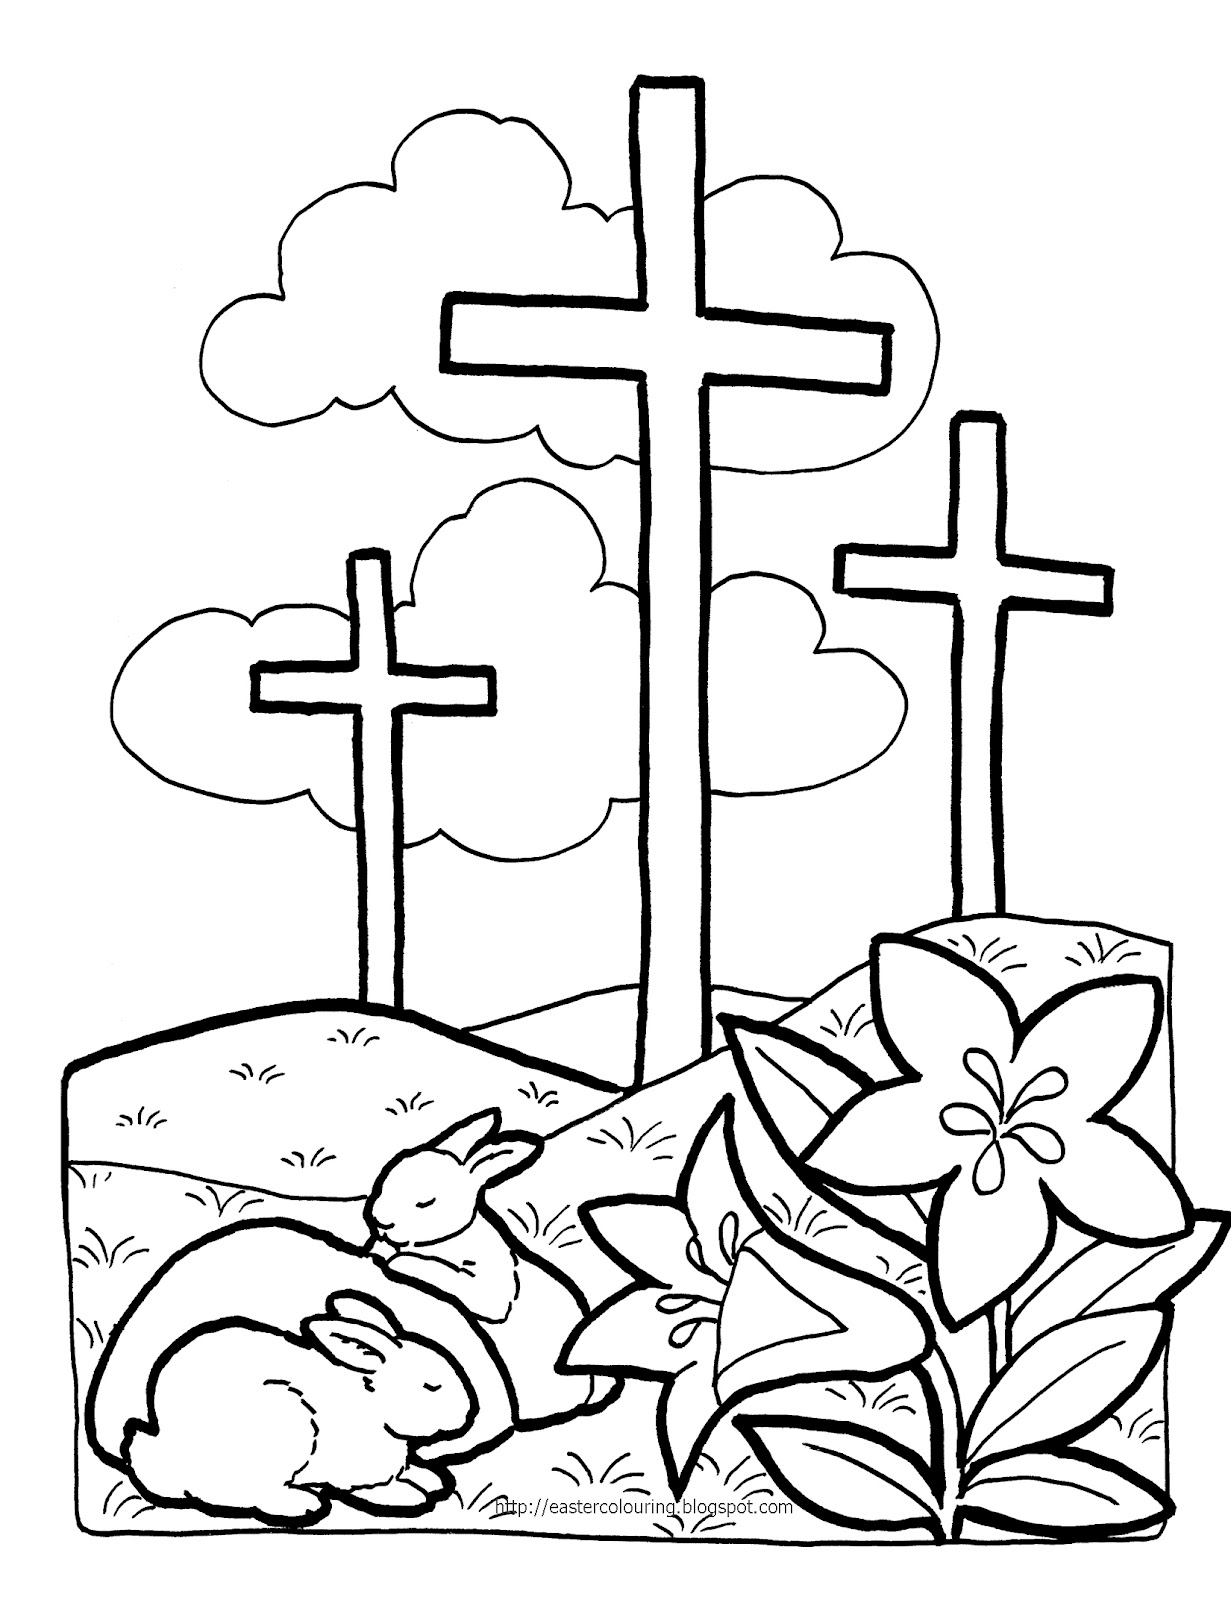 Religious Easter Images Free Cliparts That You Can Download To You